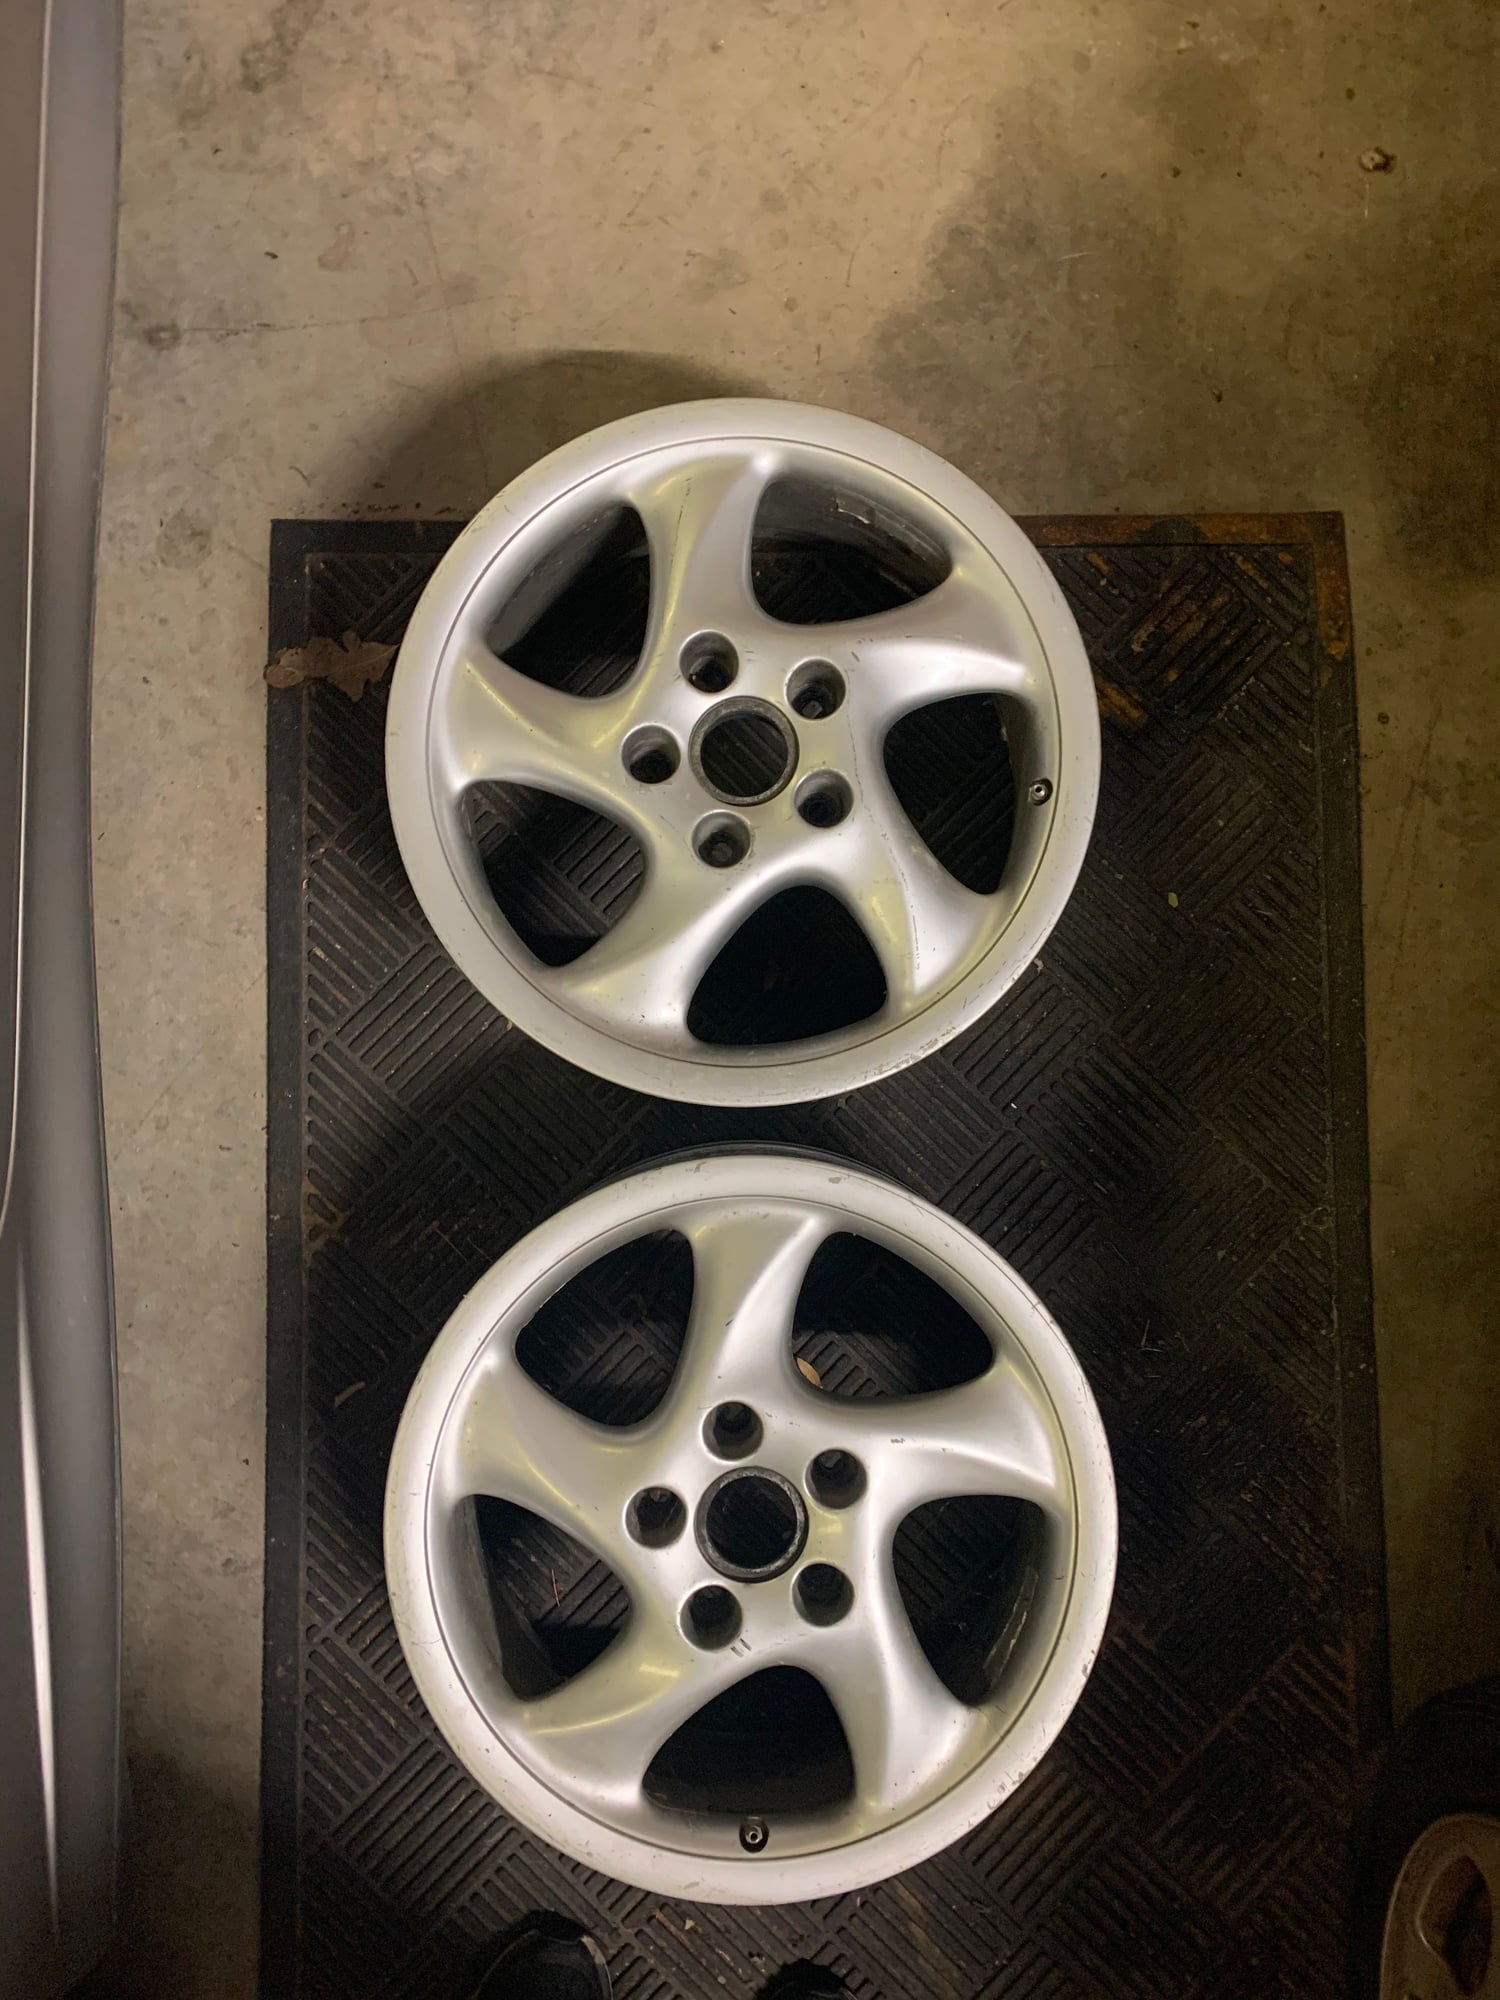 Wheels and Tires/Axles - FS: OEM 993 hollow spokes - Used - All Years Any Make All Models - Raleigh, NC 27606, United States